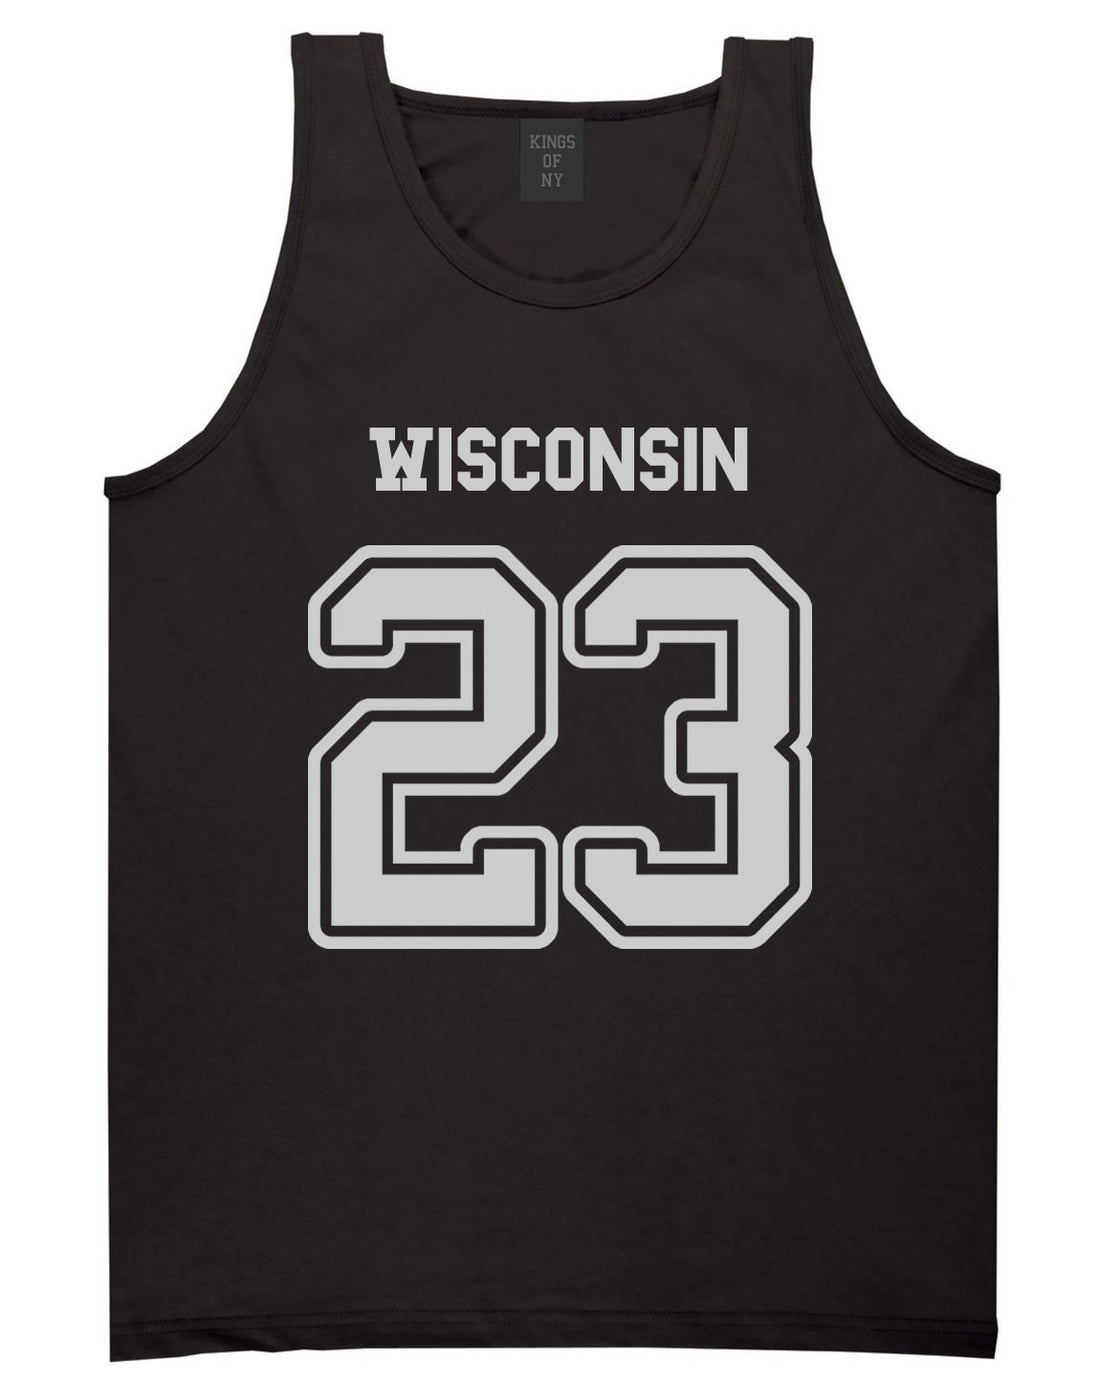 Sport Style Wisconsin 23 Team State Jersey Mens Tank Top By Kings Of NY